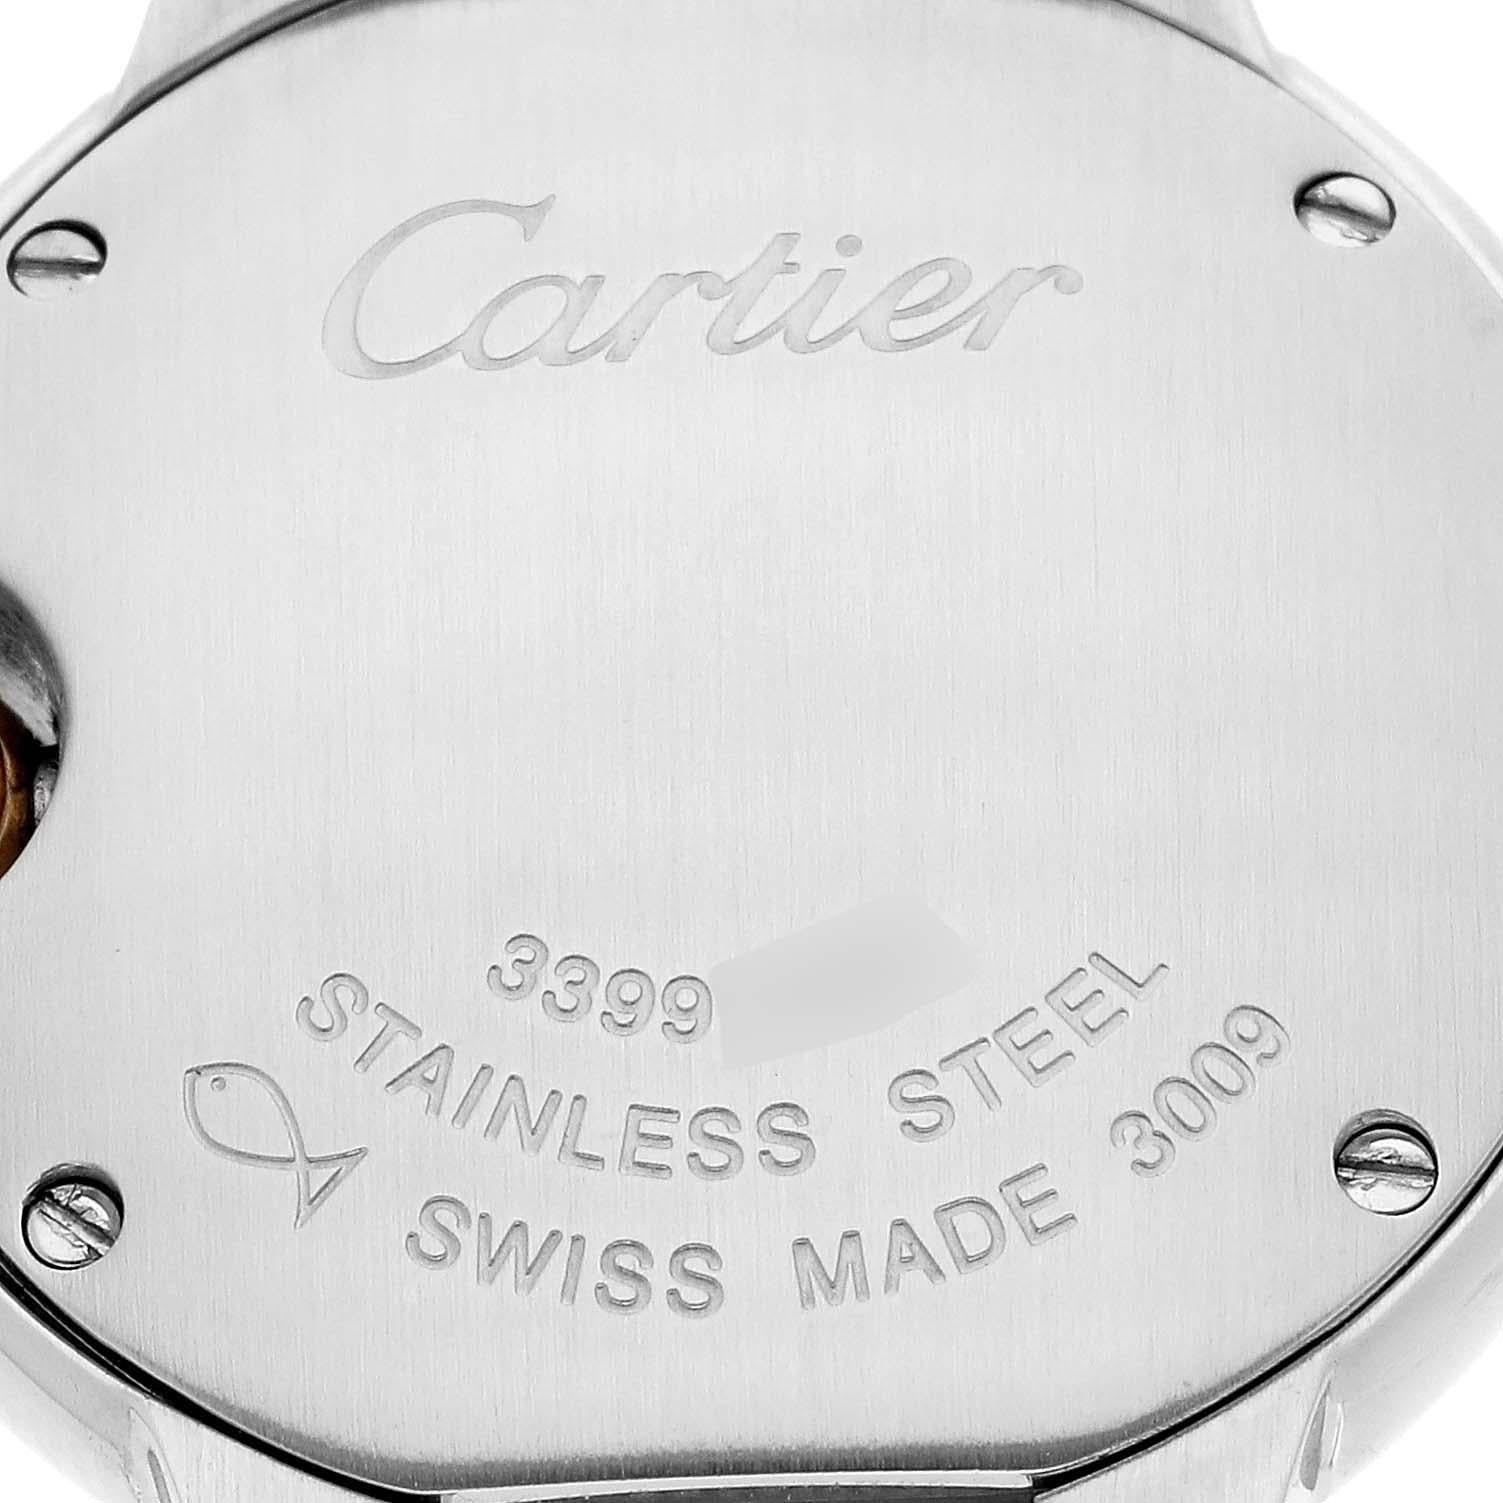 Cartier Ballon Bleu Steel Rose Gold Diamond Ladies Watch WE902030. Quartz movement. Round stainless steel case 28.0 mm in diameter. 18k rose gold fluted crown set with the blue spinel cabochon. Stainless steel smooth bezel. Scratch resistant